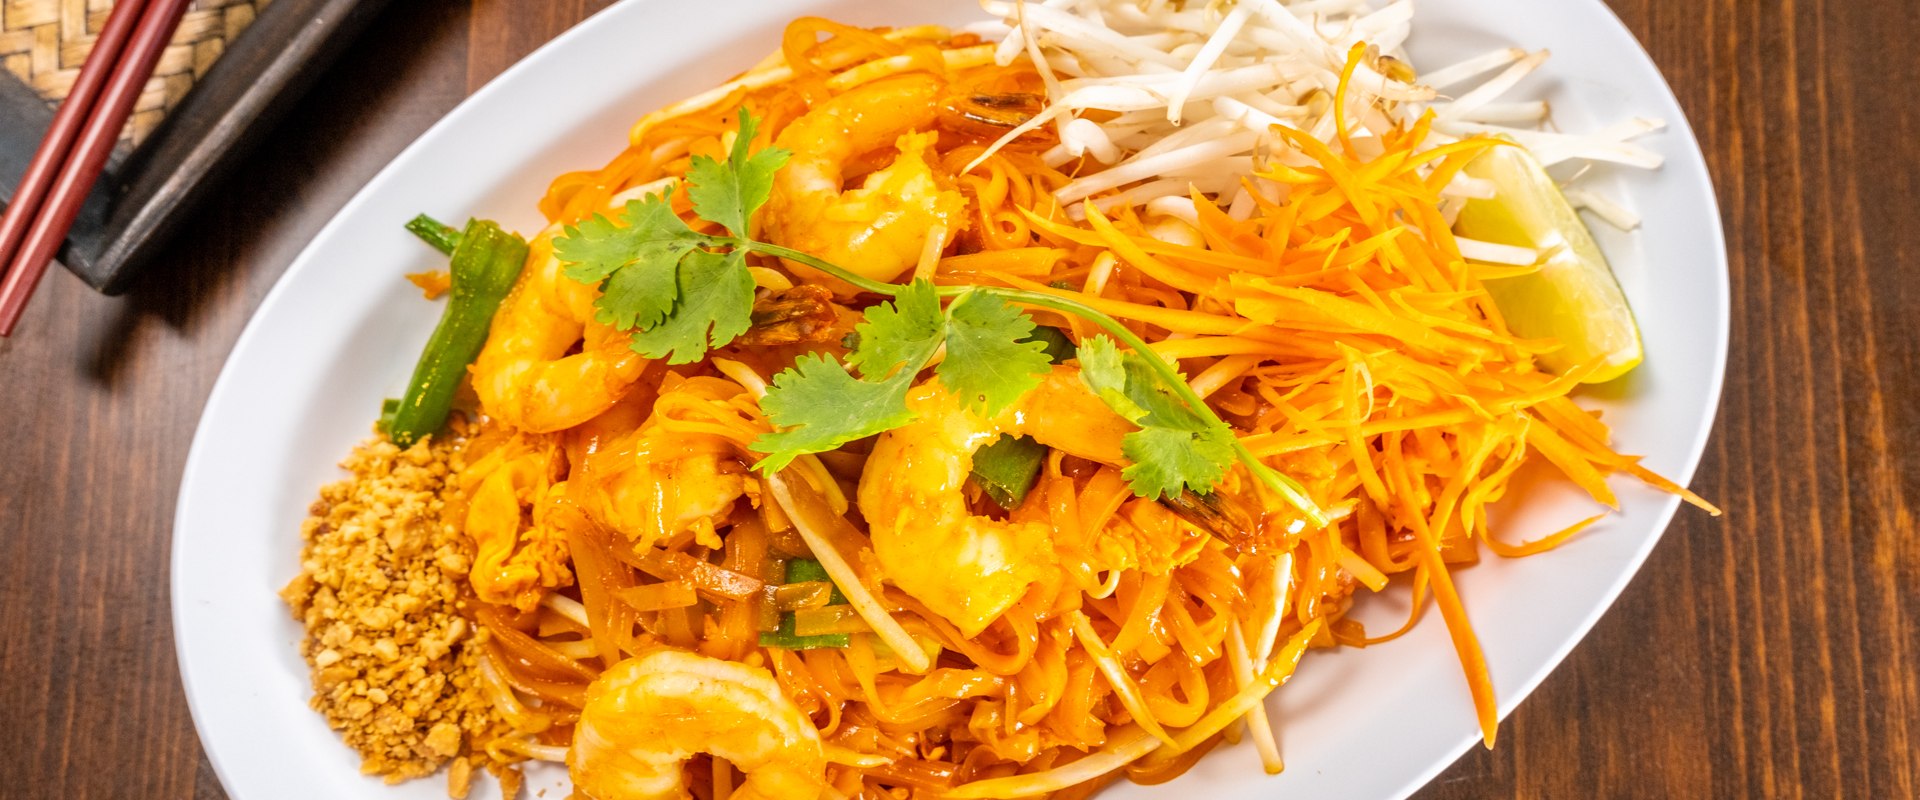 Experience Authentic Thai Cuisine at the Royal Orchid Restaurant in Riverside, California